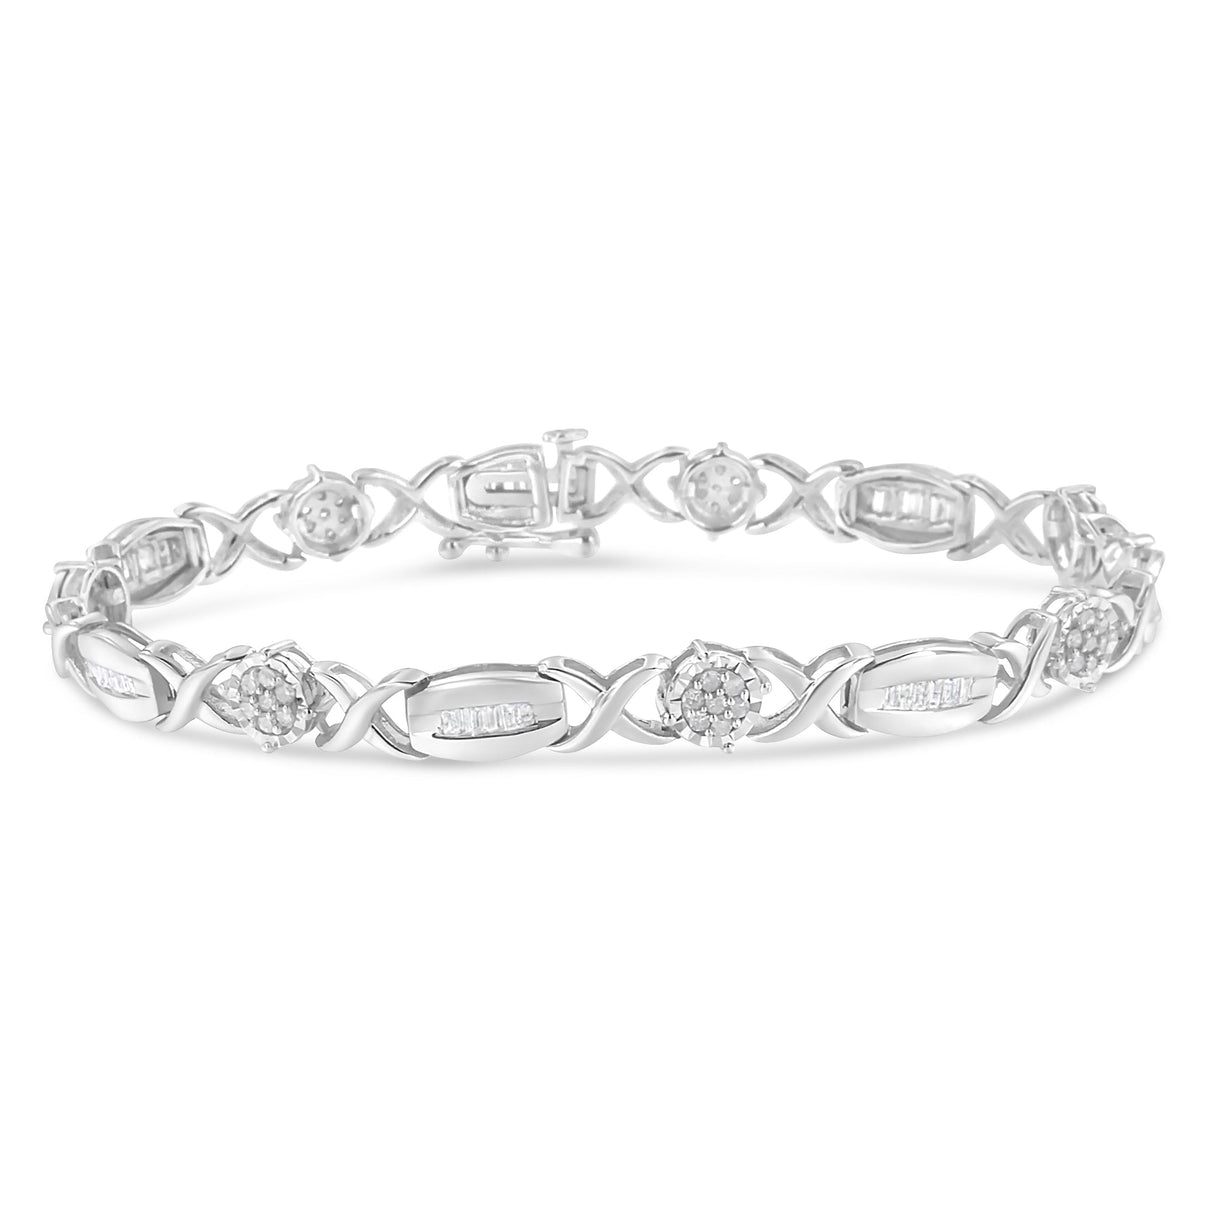 .925 Sterling Silver 1.0 Cttw Round-Cut And Baguette-Cut Diamond X-Link Bracelet (I-J Color, I1-I2 Clarity) - 7" - Tuesday Morning-Bracelets